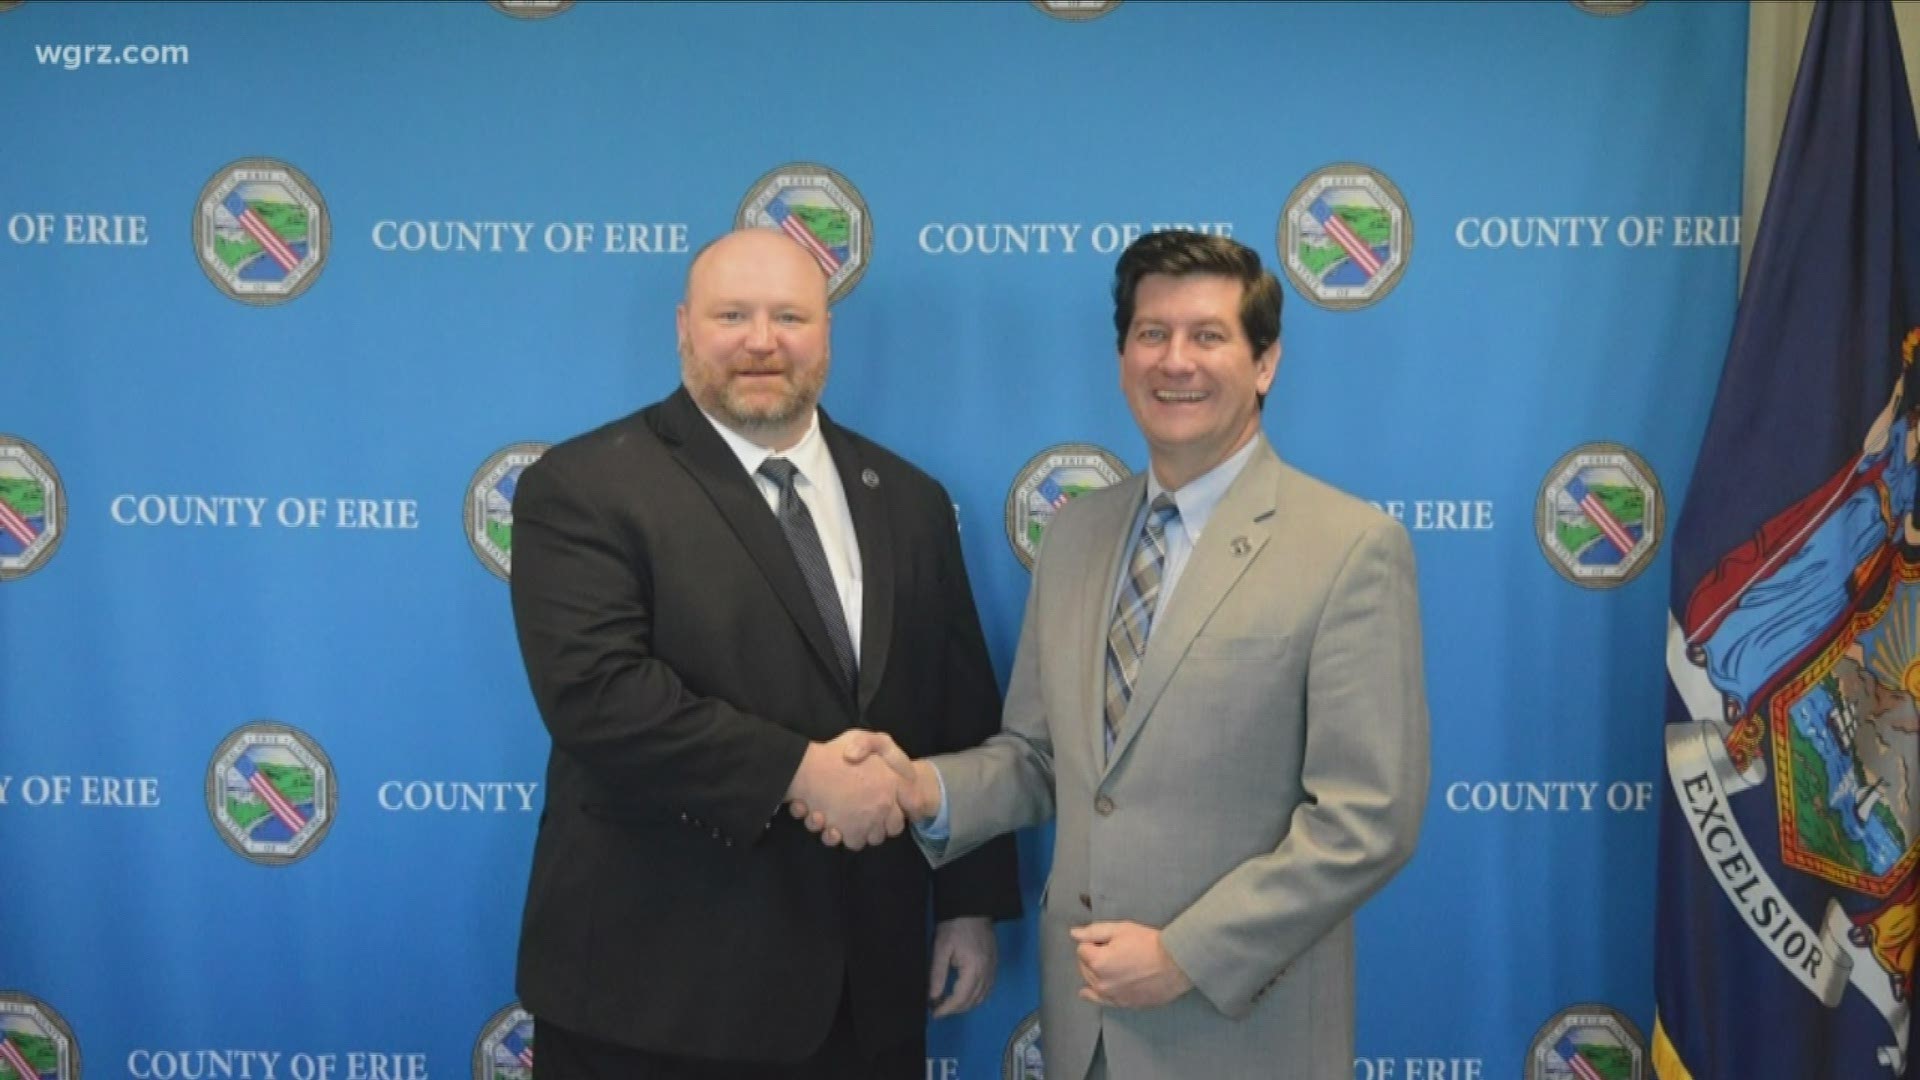 County executive Mark Poloncarz announced this morning... that Geoffrey Szymanski is now the County Director of Workforce Development